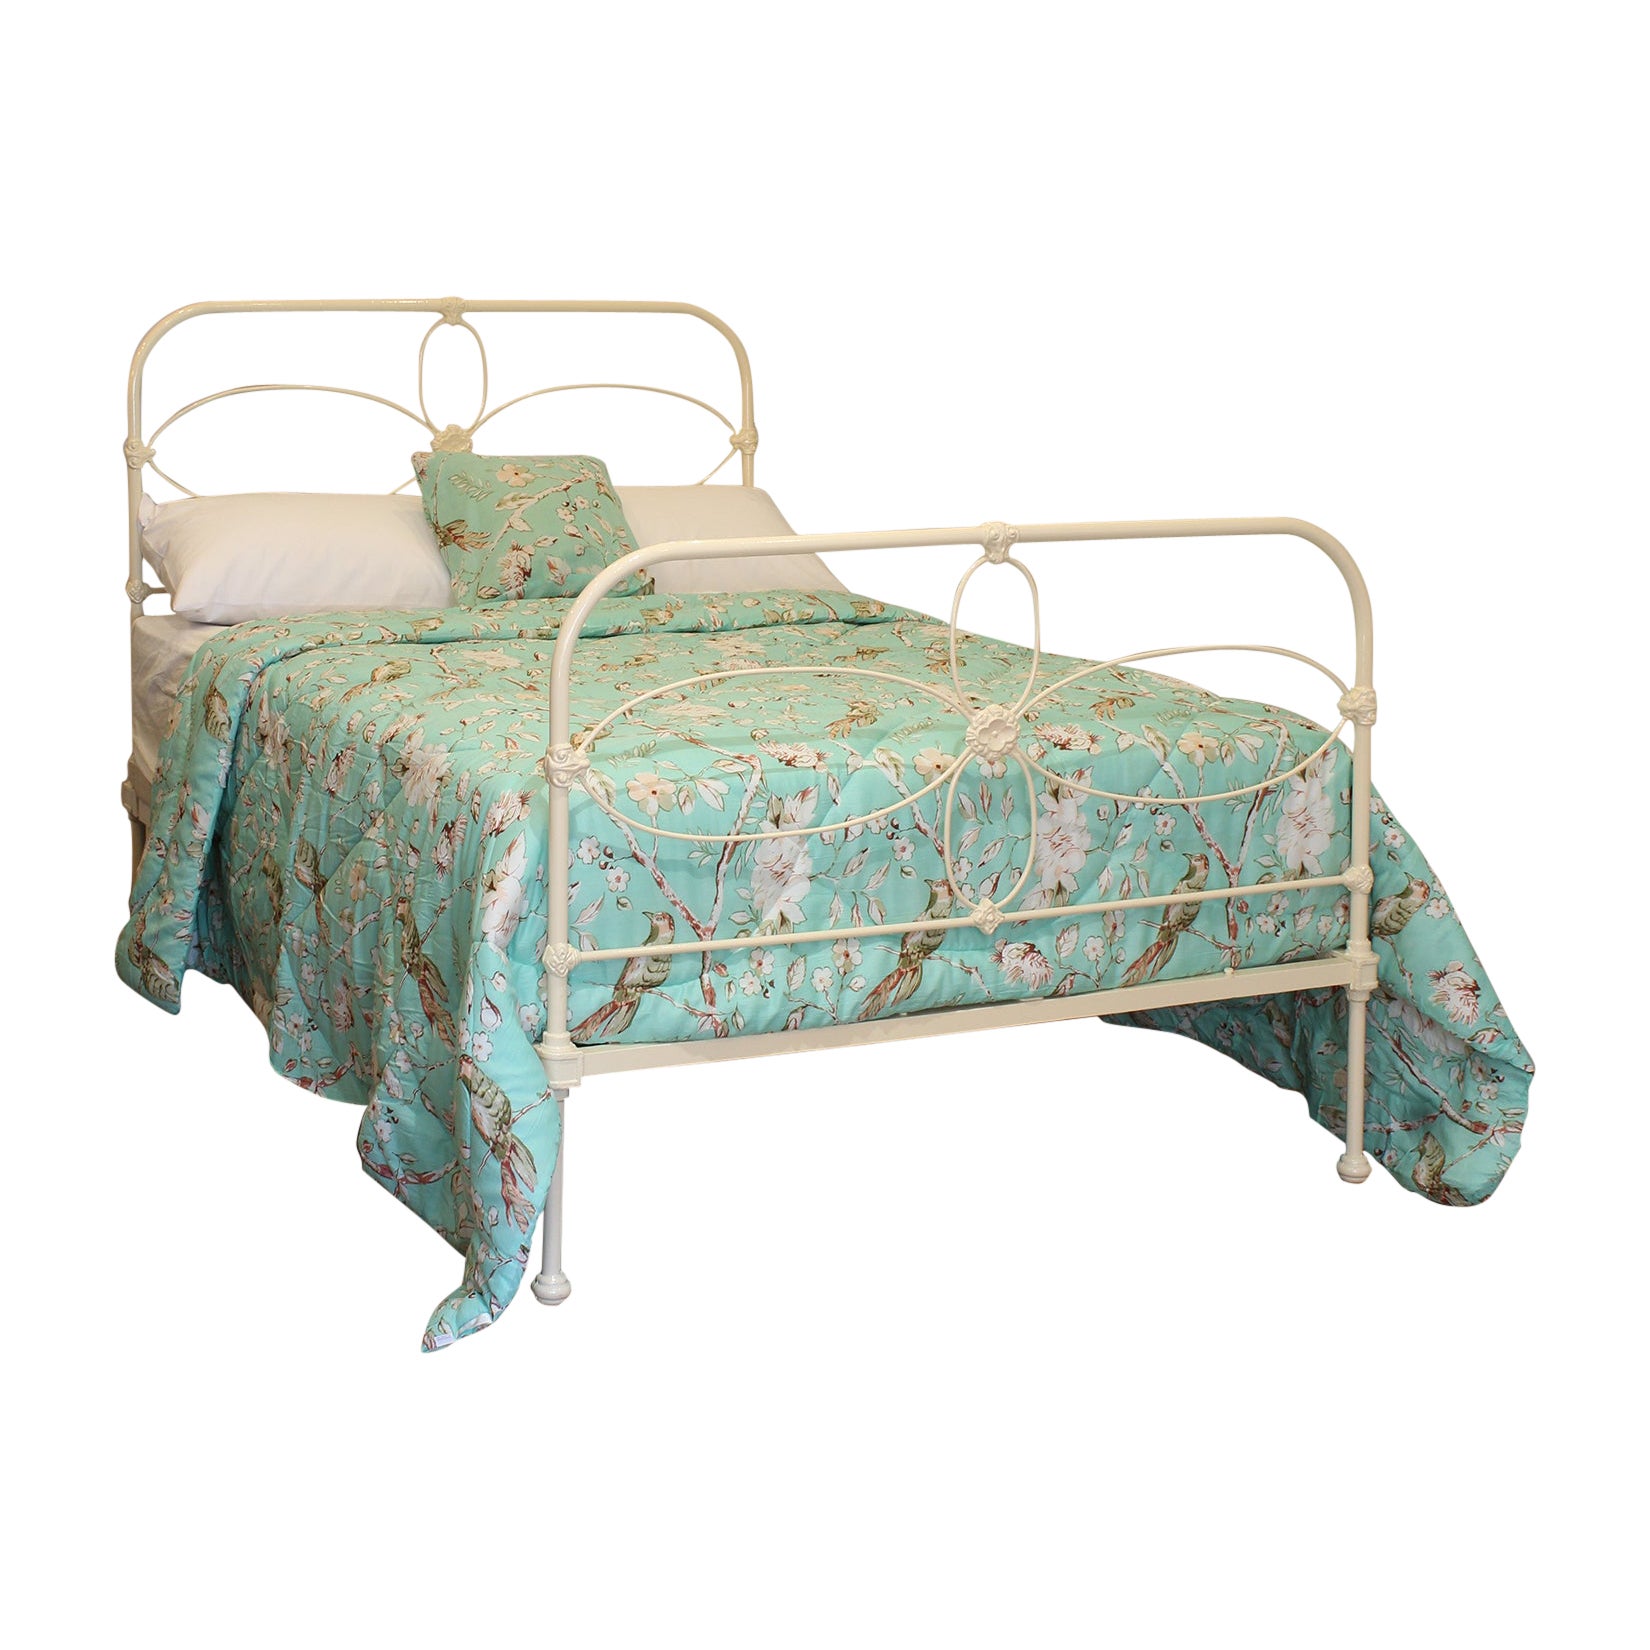 Double Brass and Iron Bed, MD139 For Sale